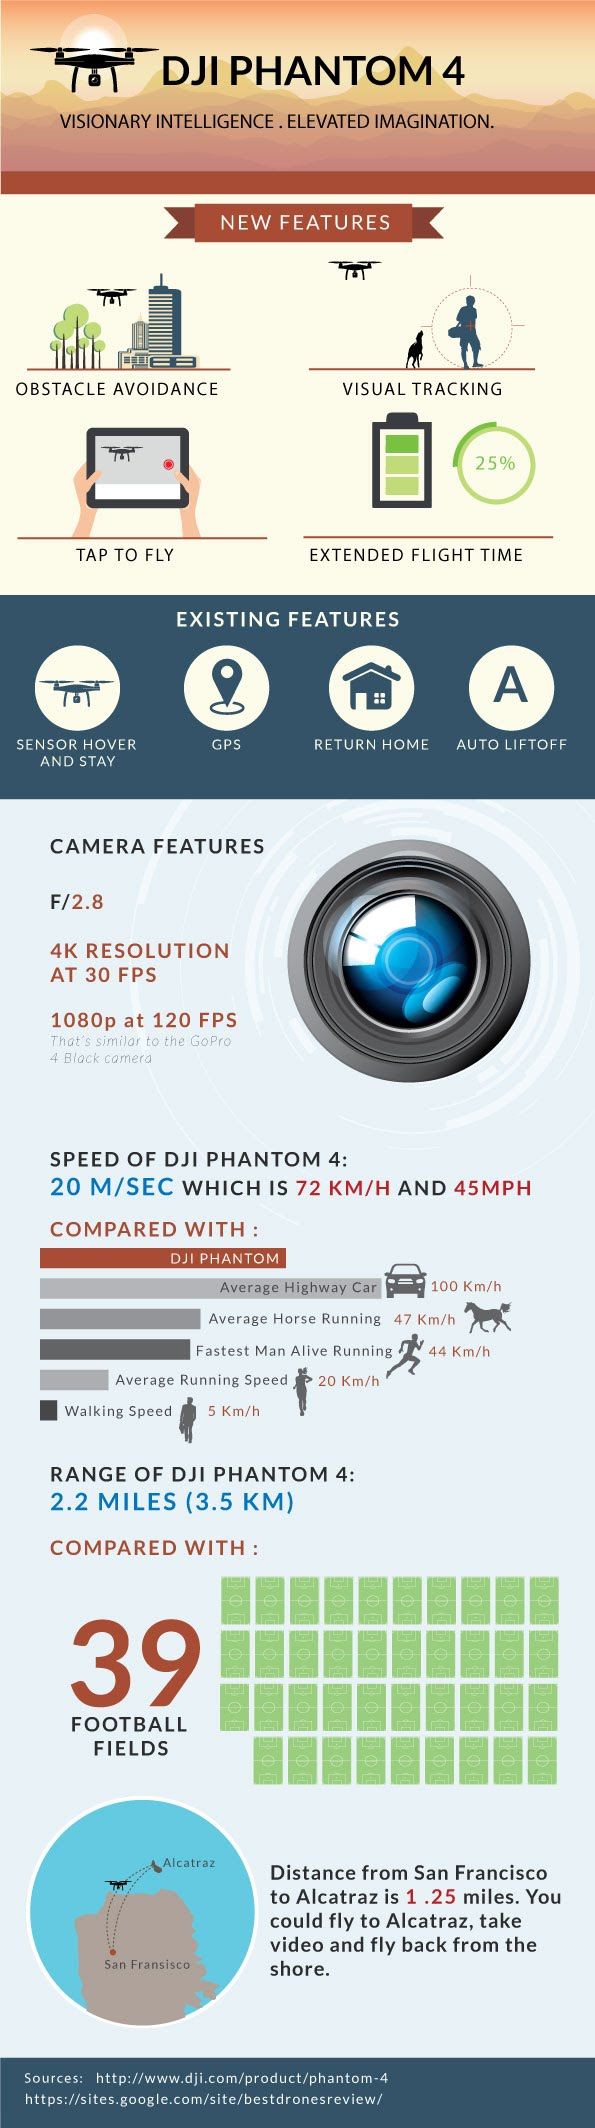 Infographic Of The Day: DJI Phantom 4 Drone Performance Information